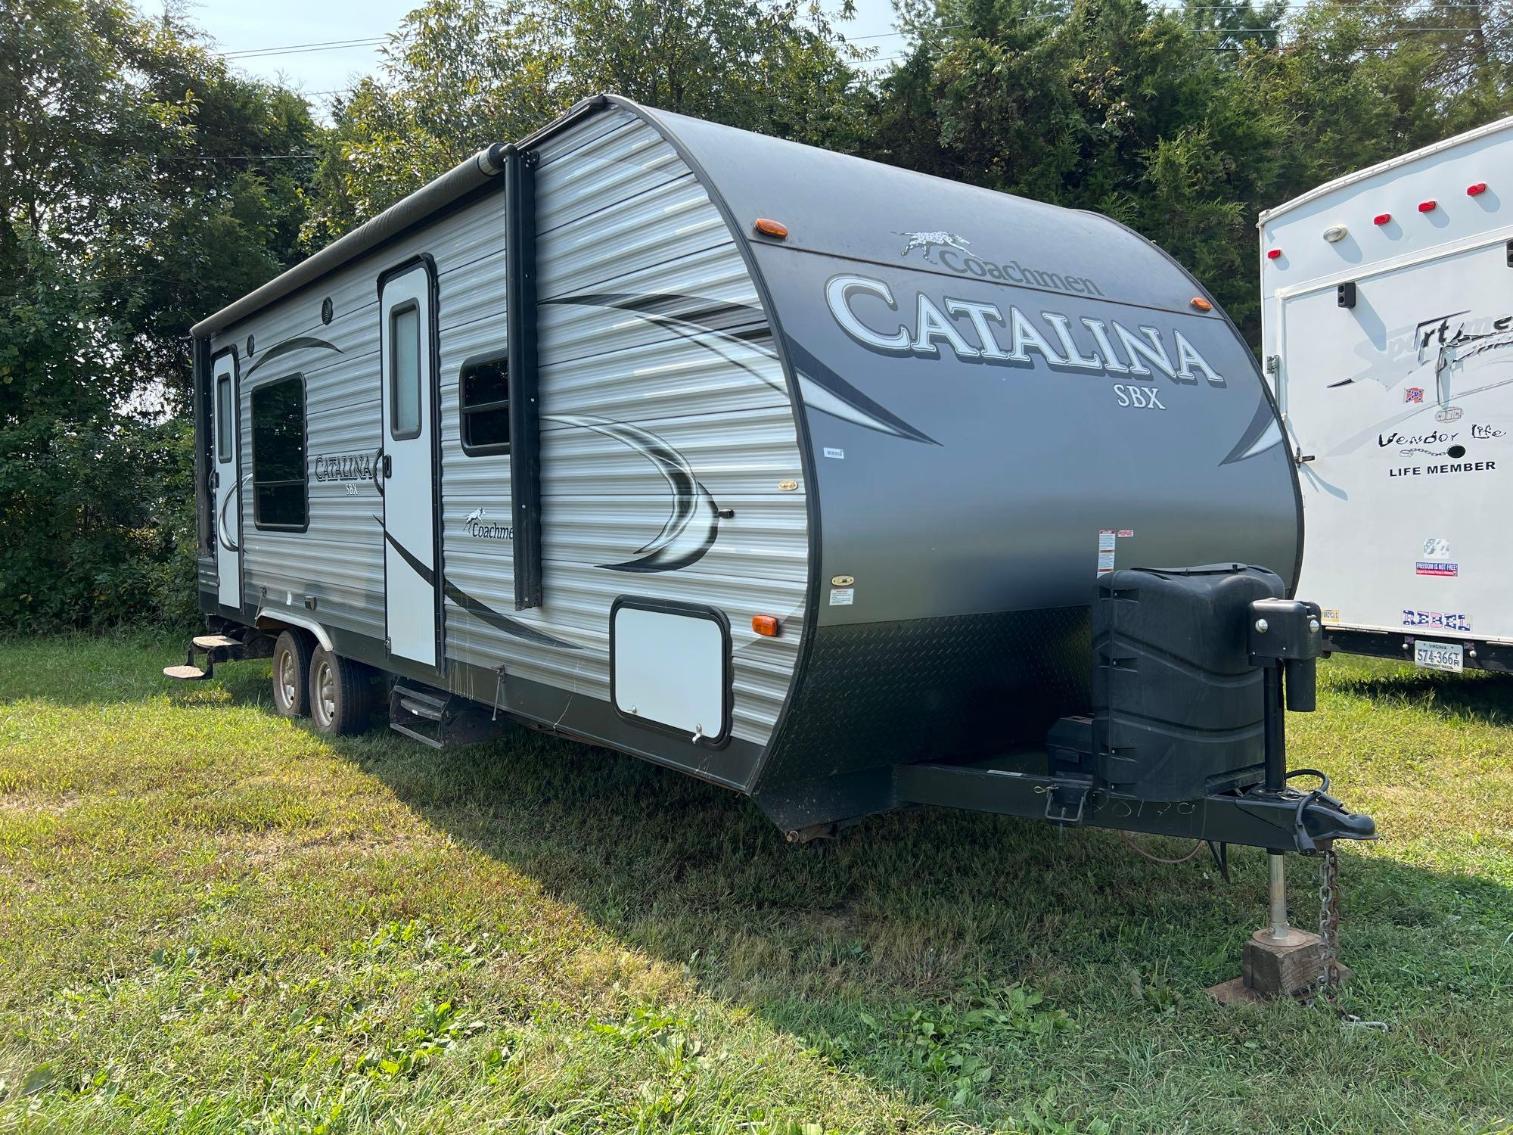 Image for 2018 Coachmen Catalina SBX, 261IKS, 1 Slide Out, TITLE WILL BE DELAYED UP TO 45 DAYS